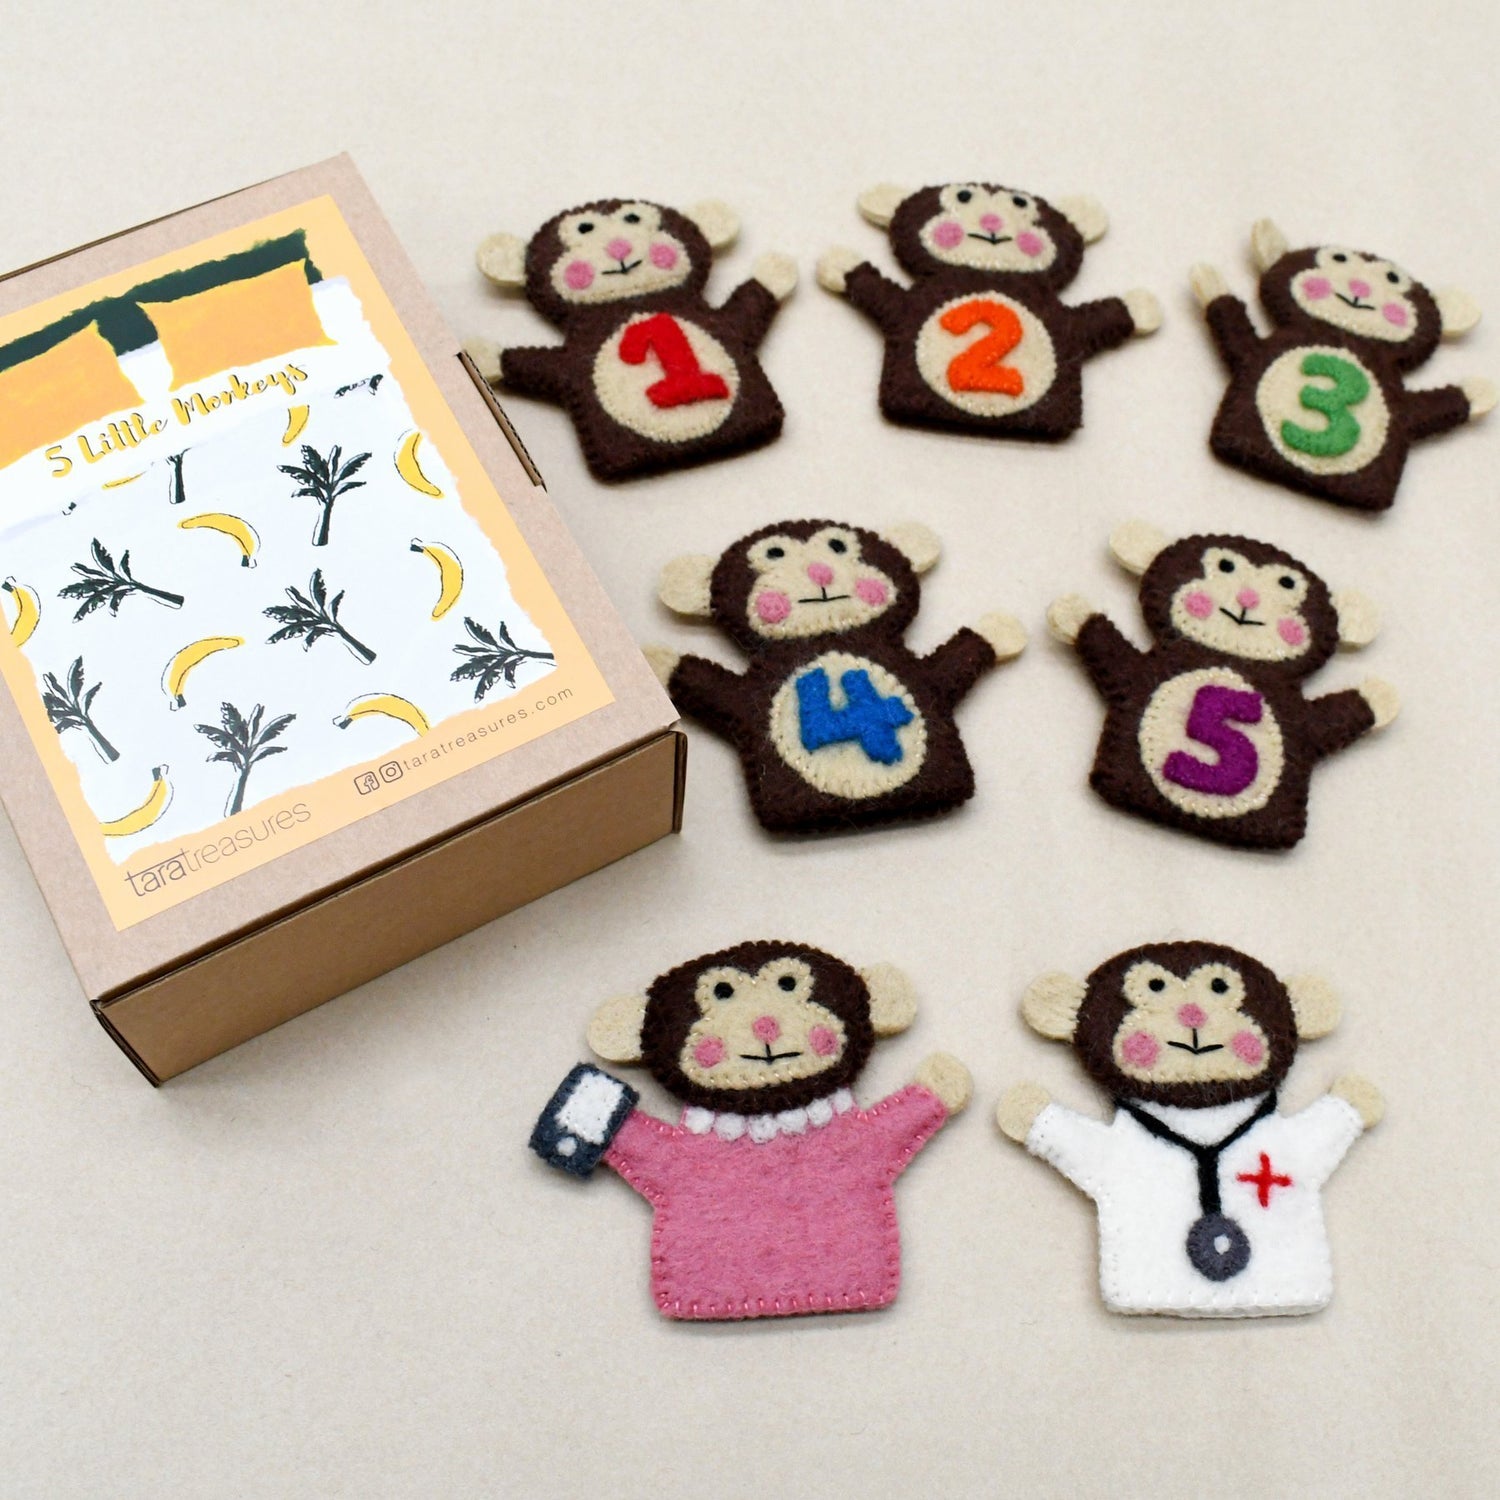 FIVE LITTLE MONKEYS FINGER PUPPET SET by TARA TREASURES - The Playful Collective